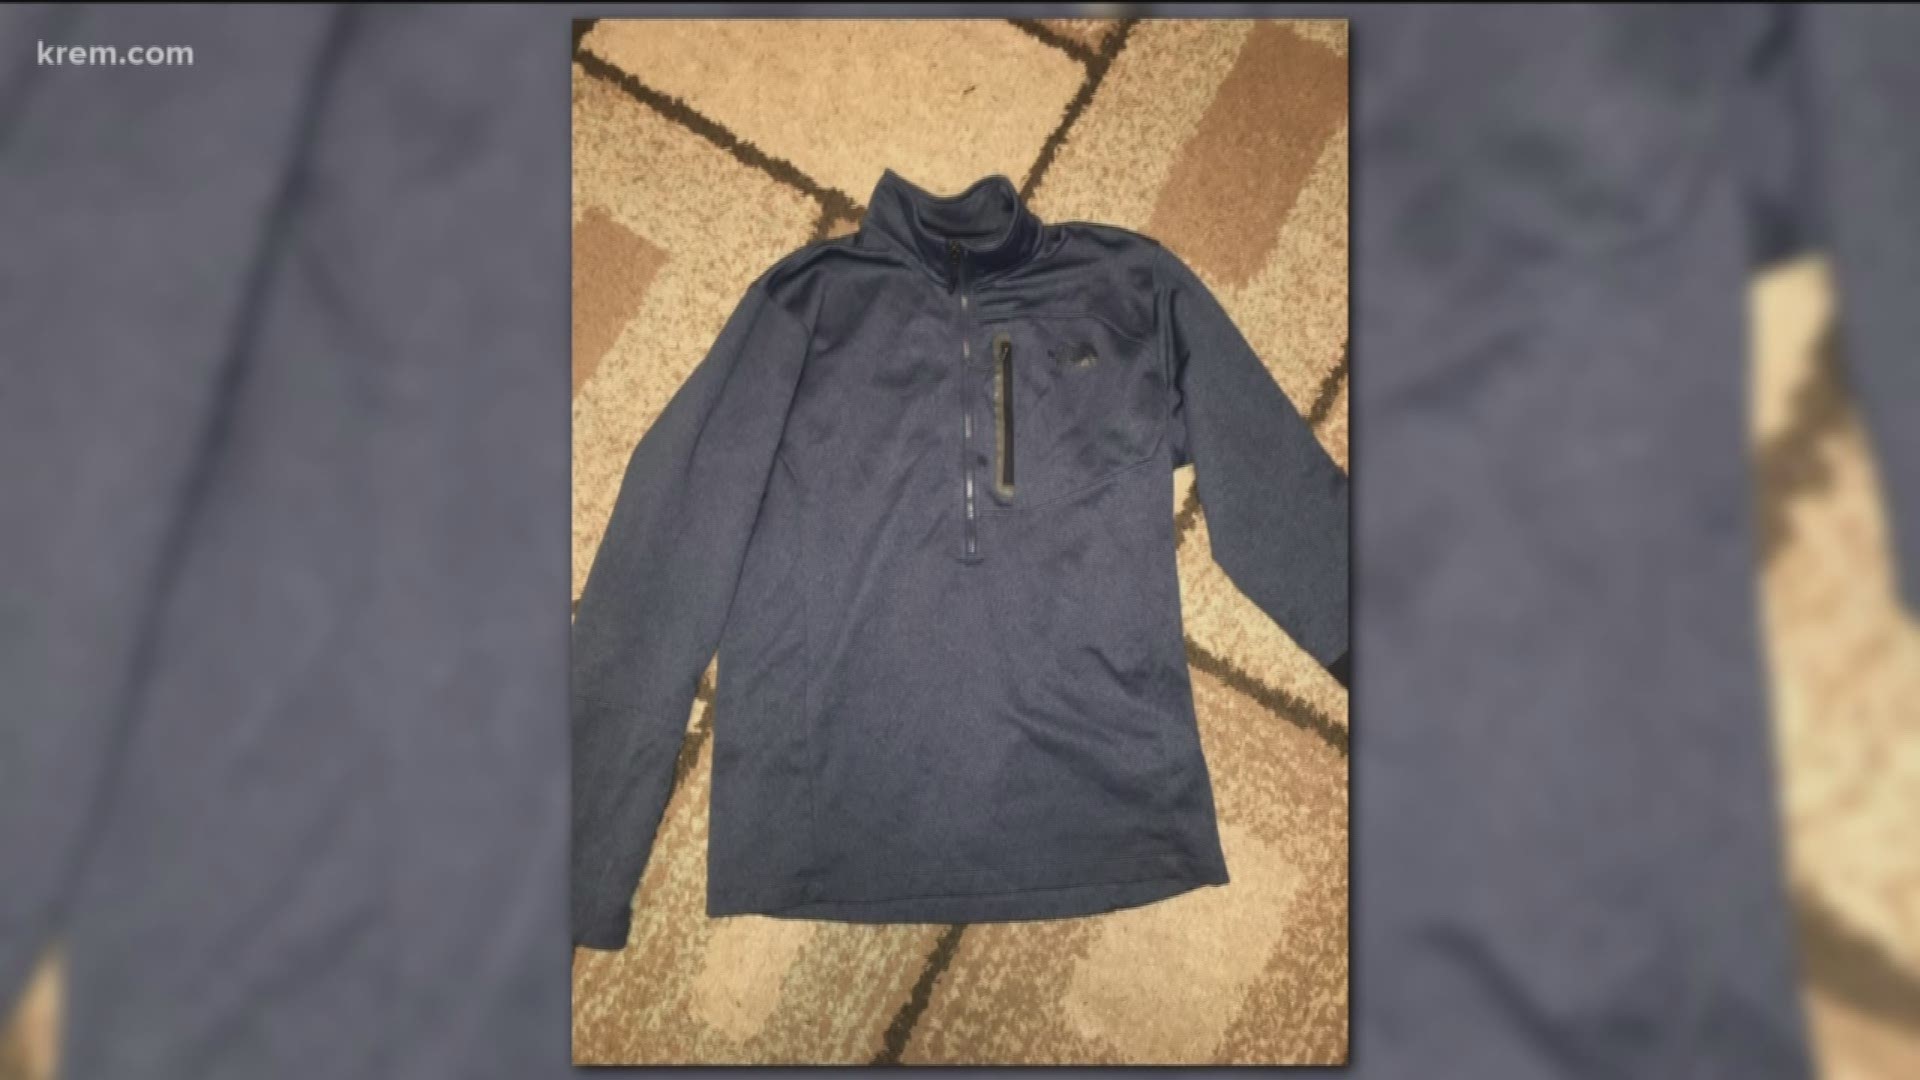 The navy blue North Face was purchased at the Real Life Ministries Thrift Store in Pinehurst.